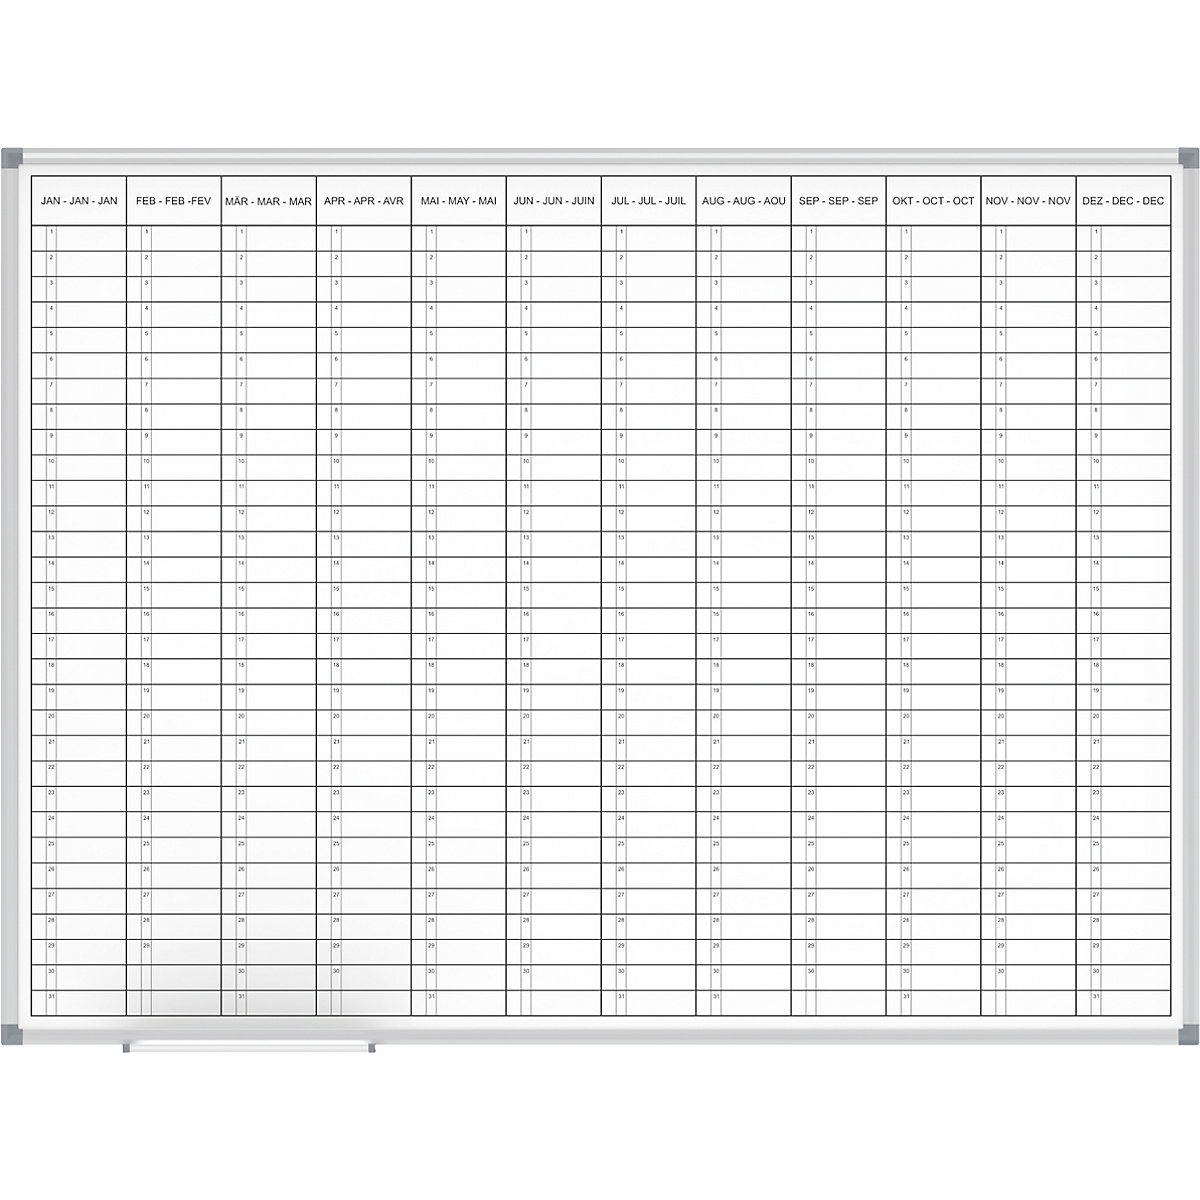 Planning board – MAUL, yearly planner, 12 month view, width 1200 mm-2